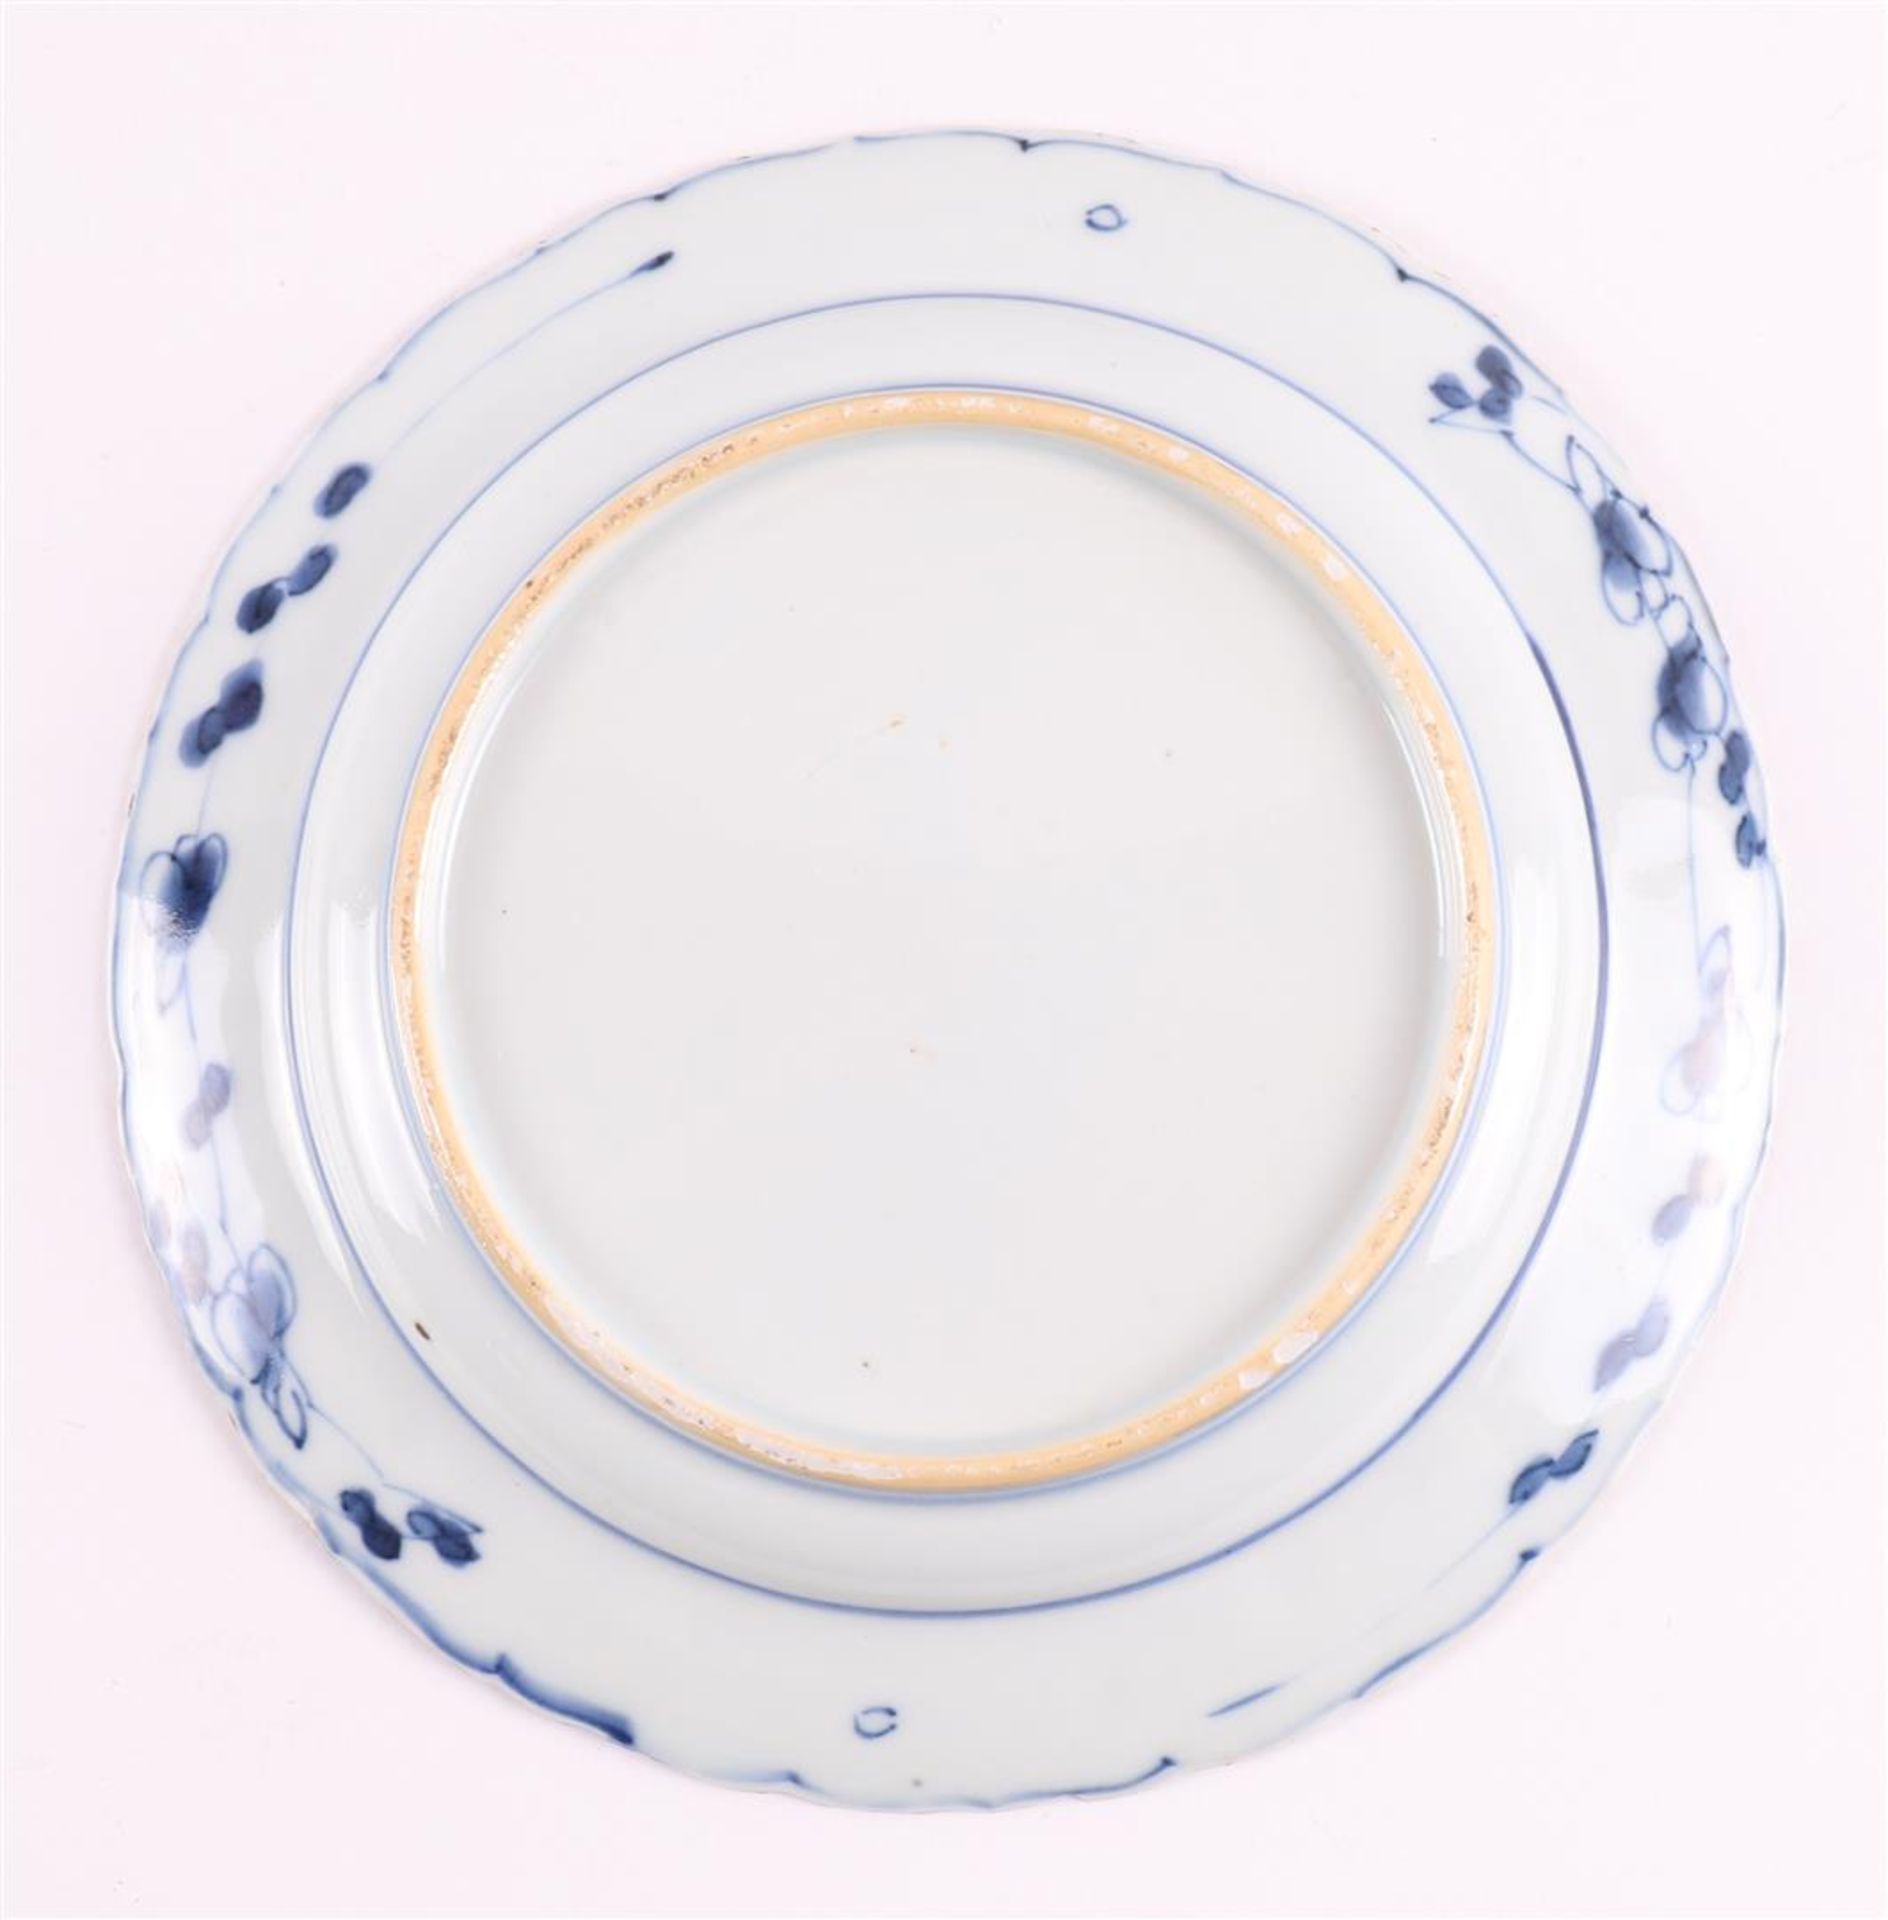 A blue/white porcelain contoured plate, China, 2nd half of the 17th century. - Image 5 of 7